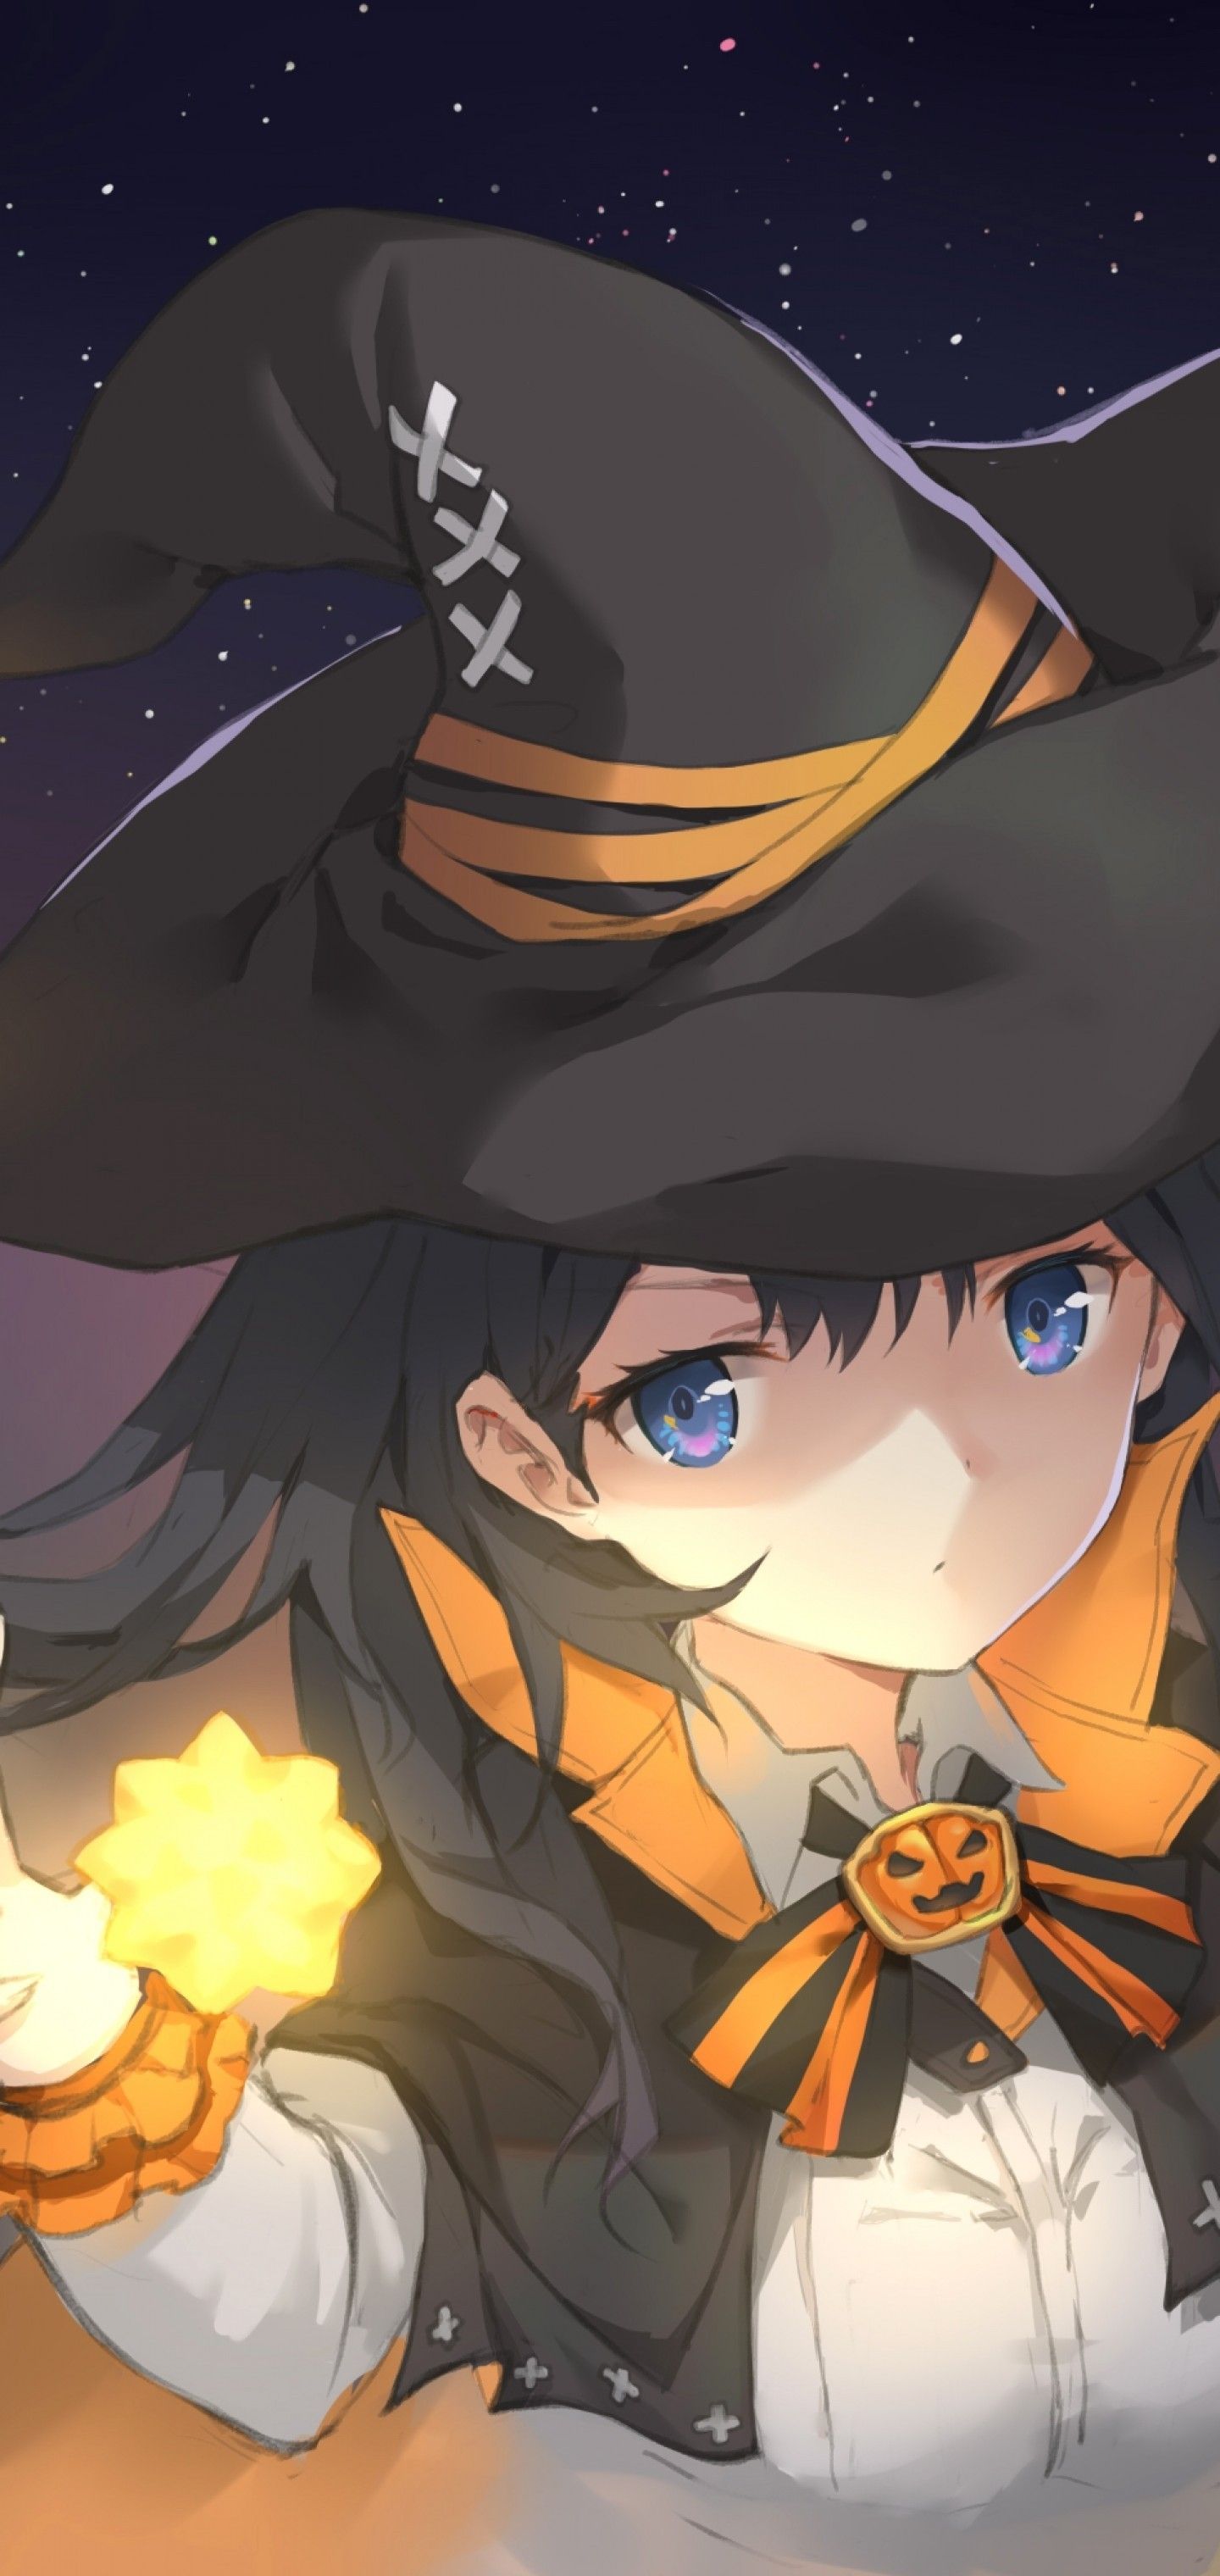 1440x3040 Download 1440x3040 Anime Witch Girl Halloween Cape Stars Wallpaper For Samsung Galaxy S10 Plus